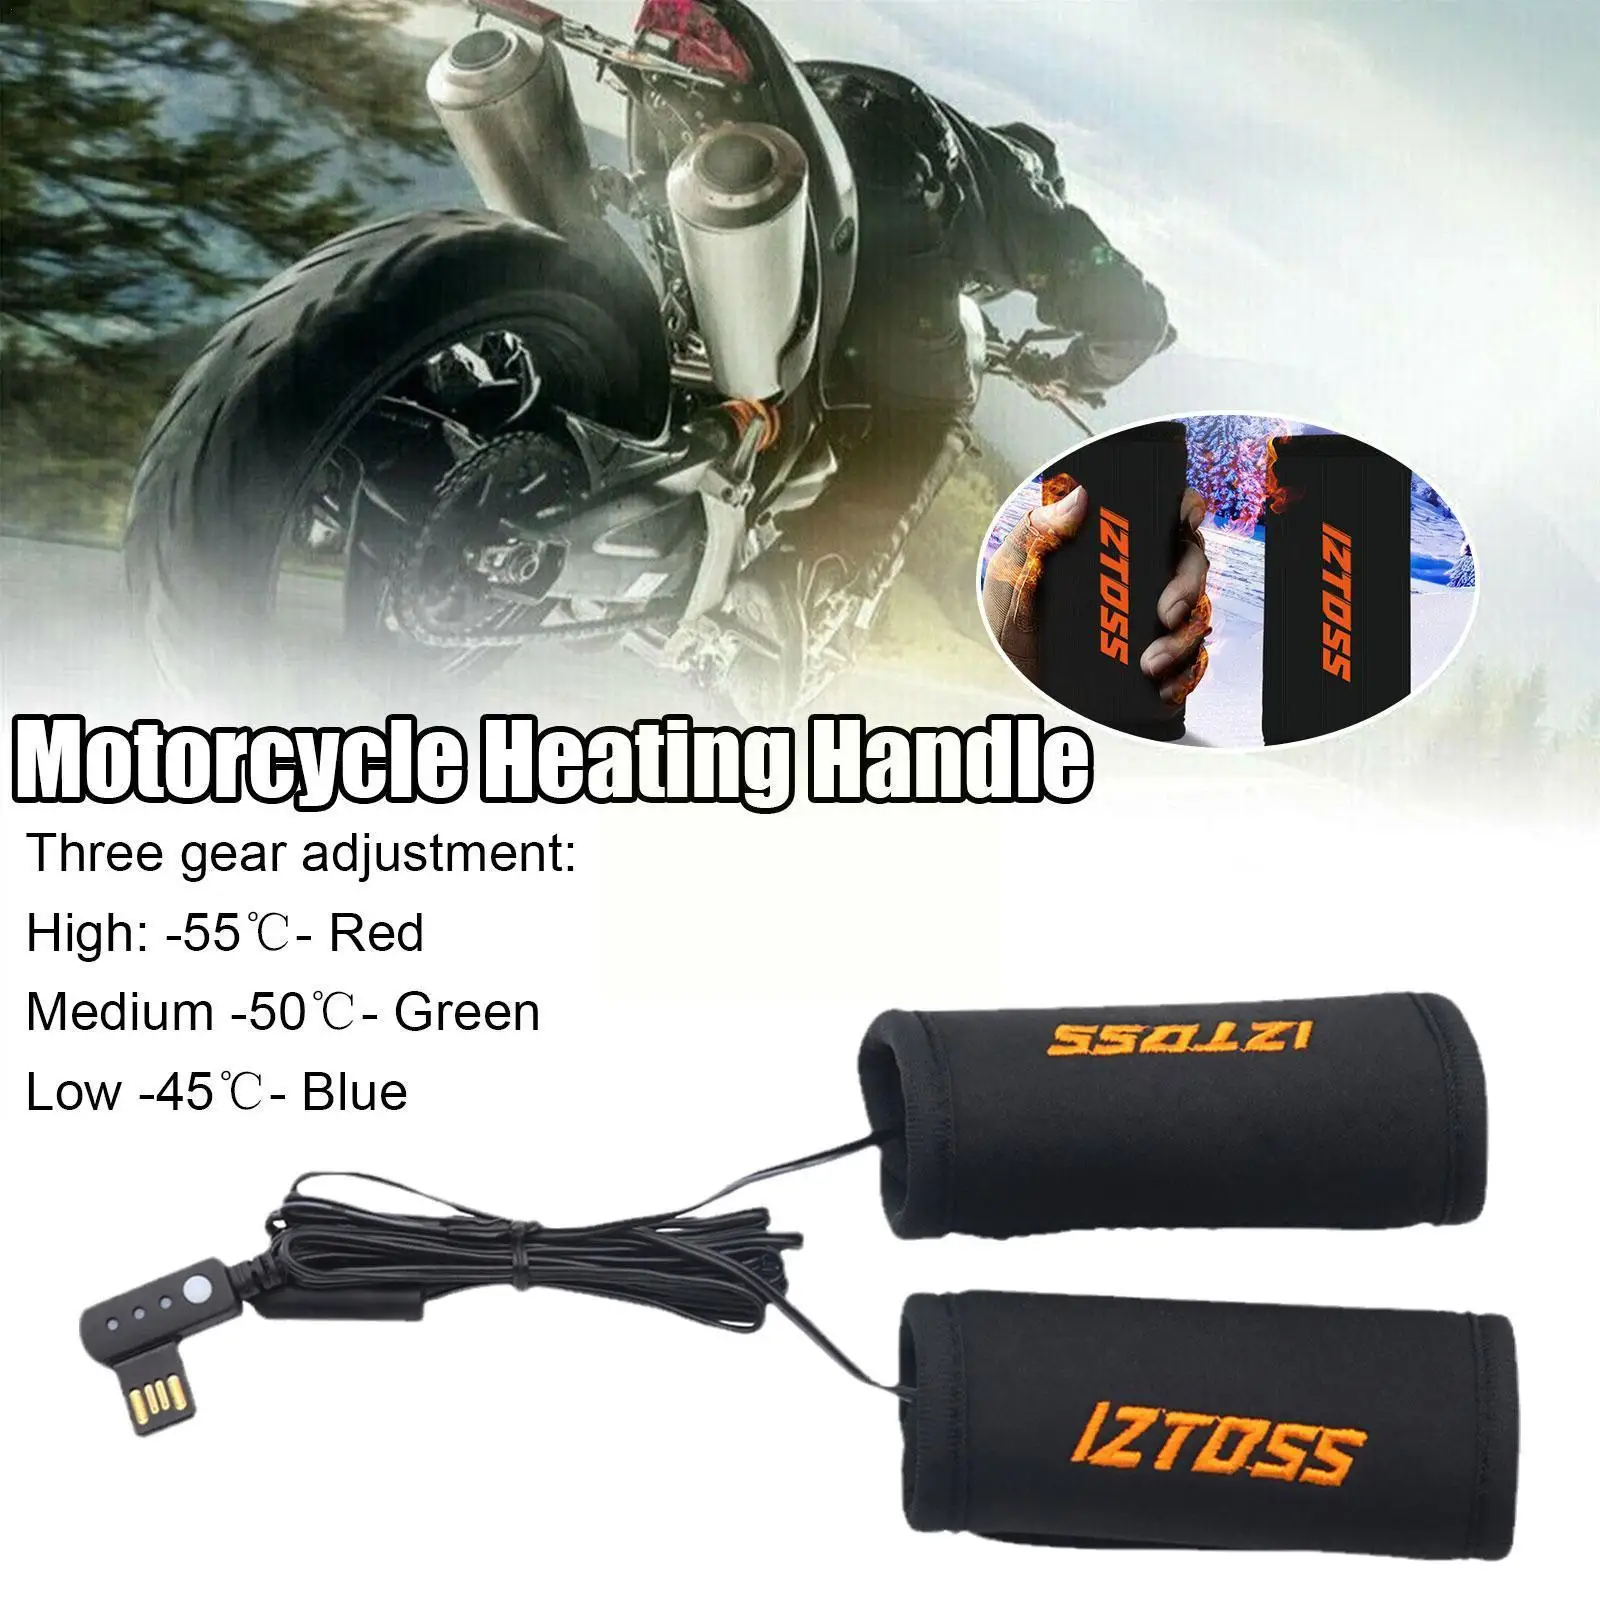 

Grip Heater 5v Usb Heated Handles Motorcycle Handle Removable Winter Bar Cuffs Accessories Grips Warmer 45-55℃ Q3w8